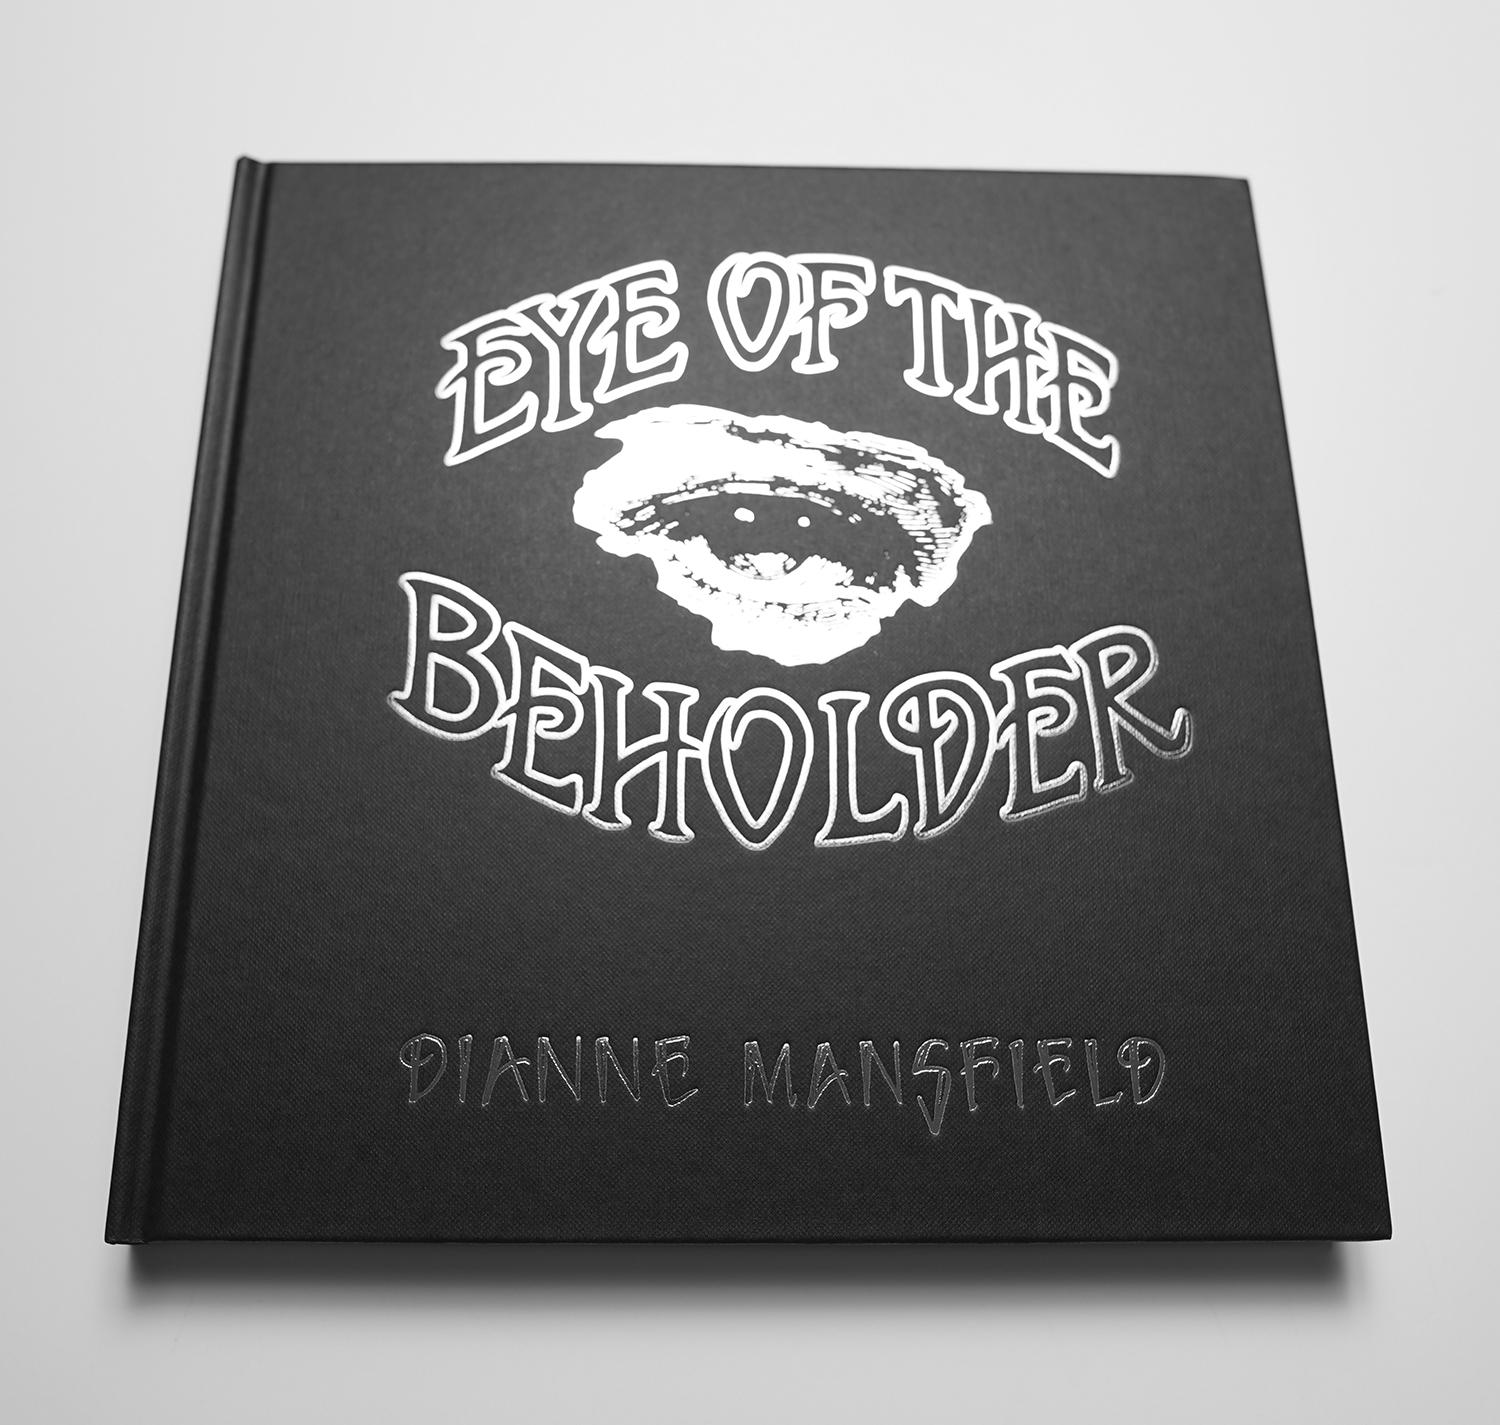 Eye of the beholder by Dianne Mansfield, tattoo photo book